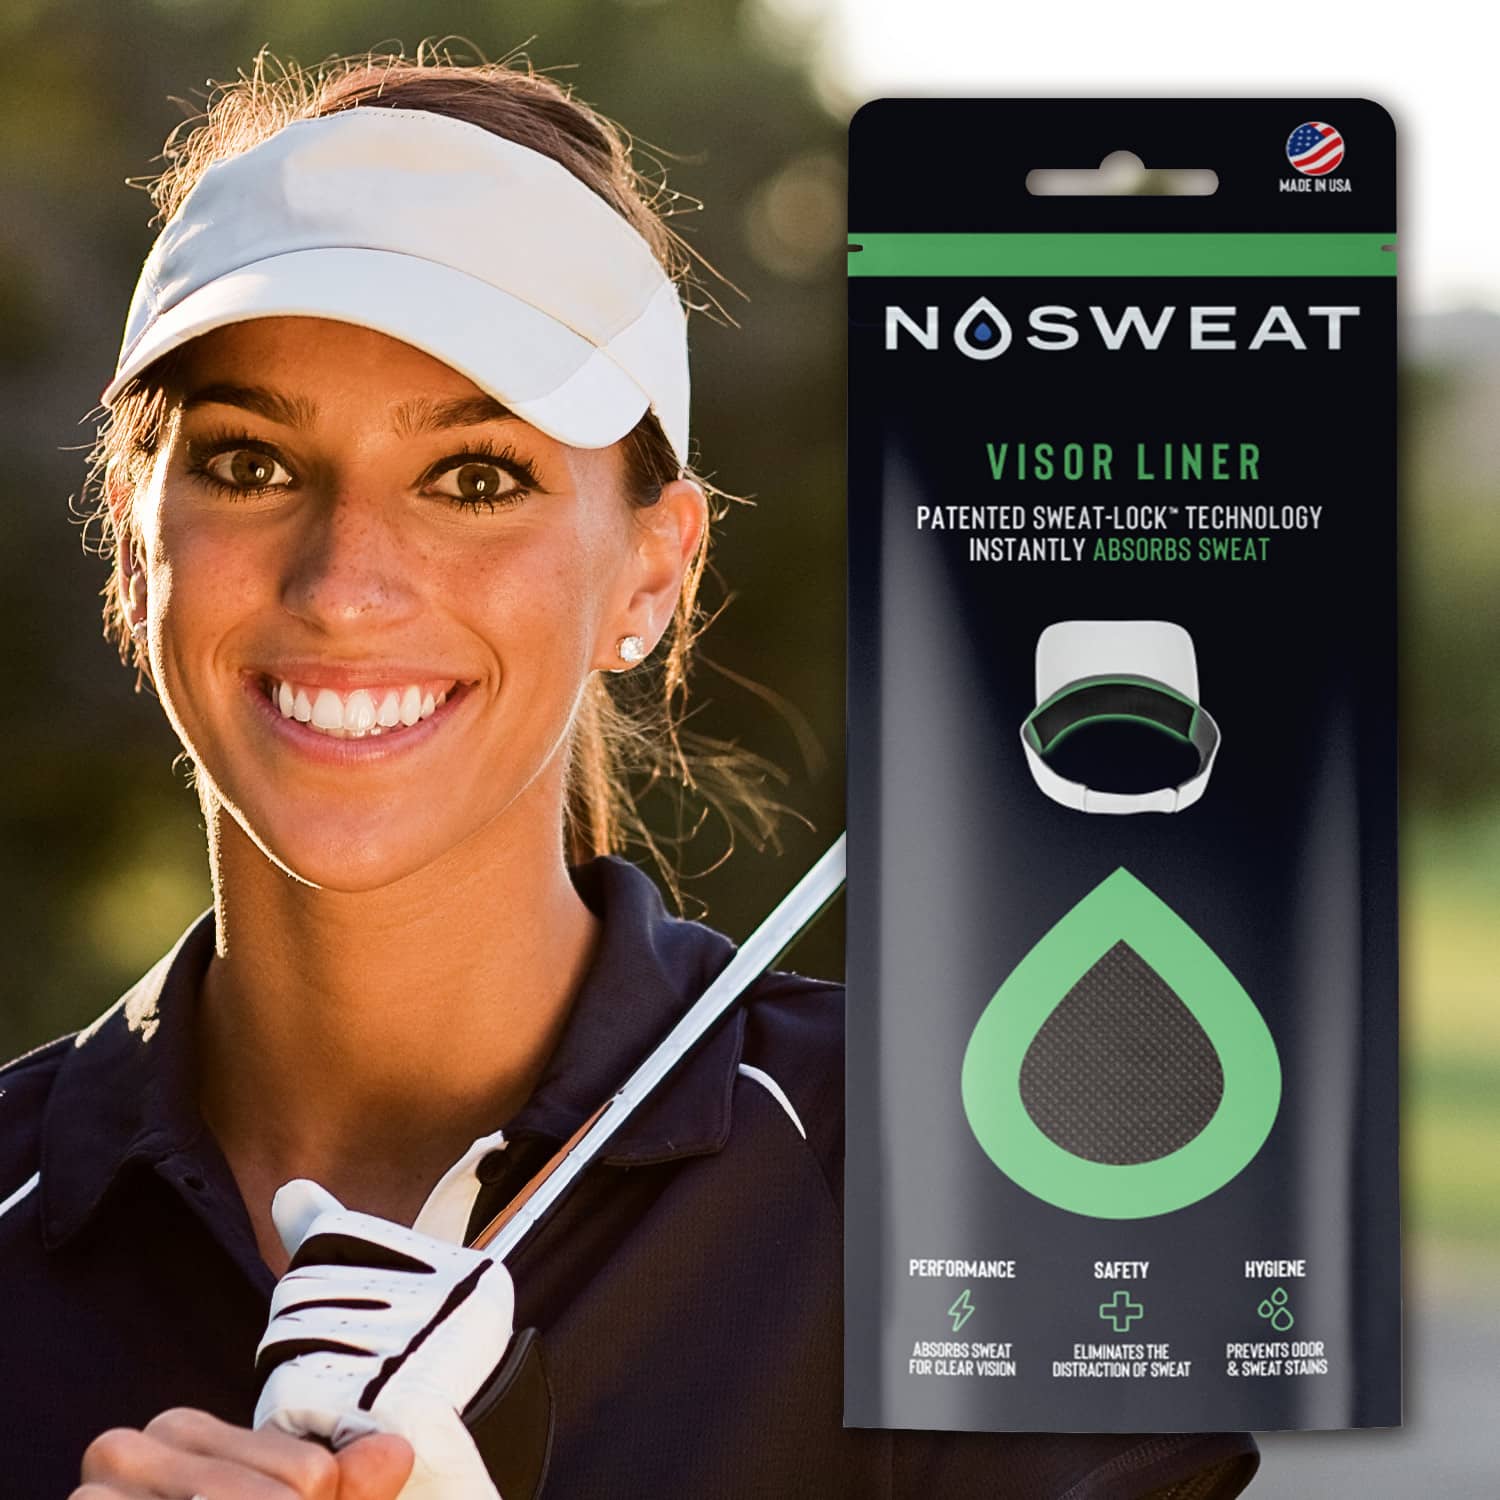 NOSWEAT Hat Liners Review - Plugged In Golf